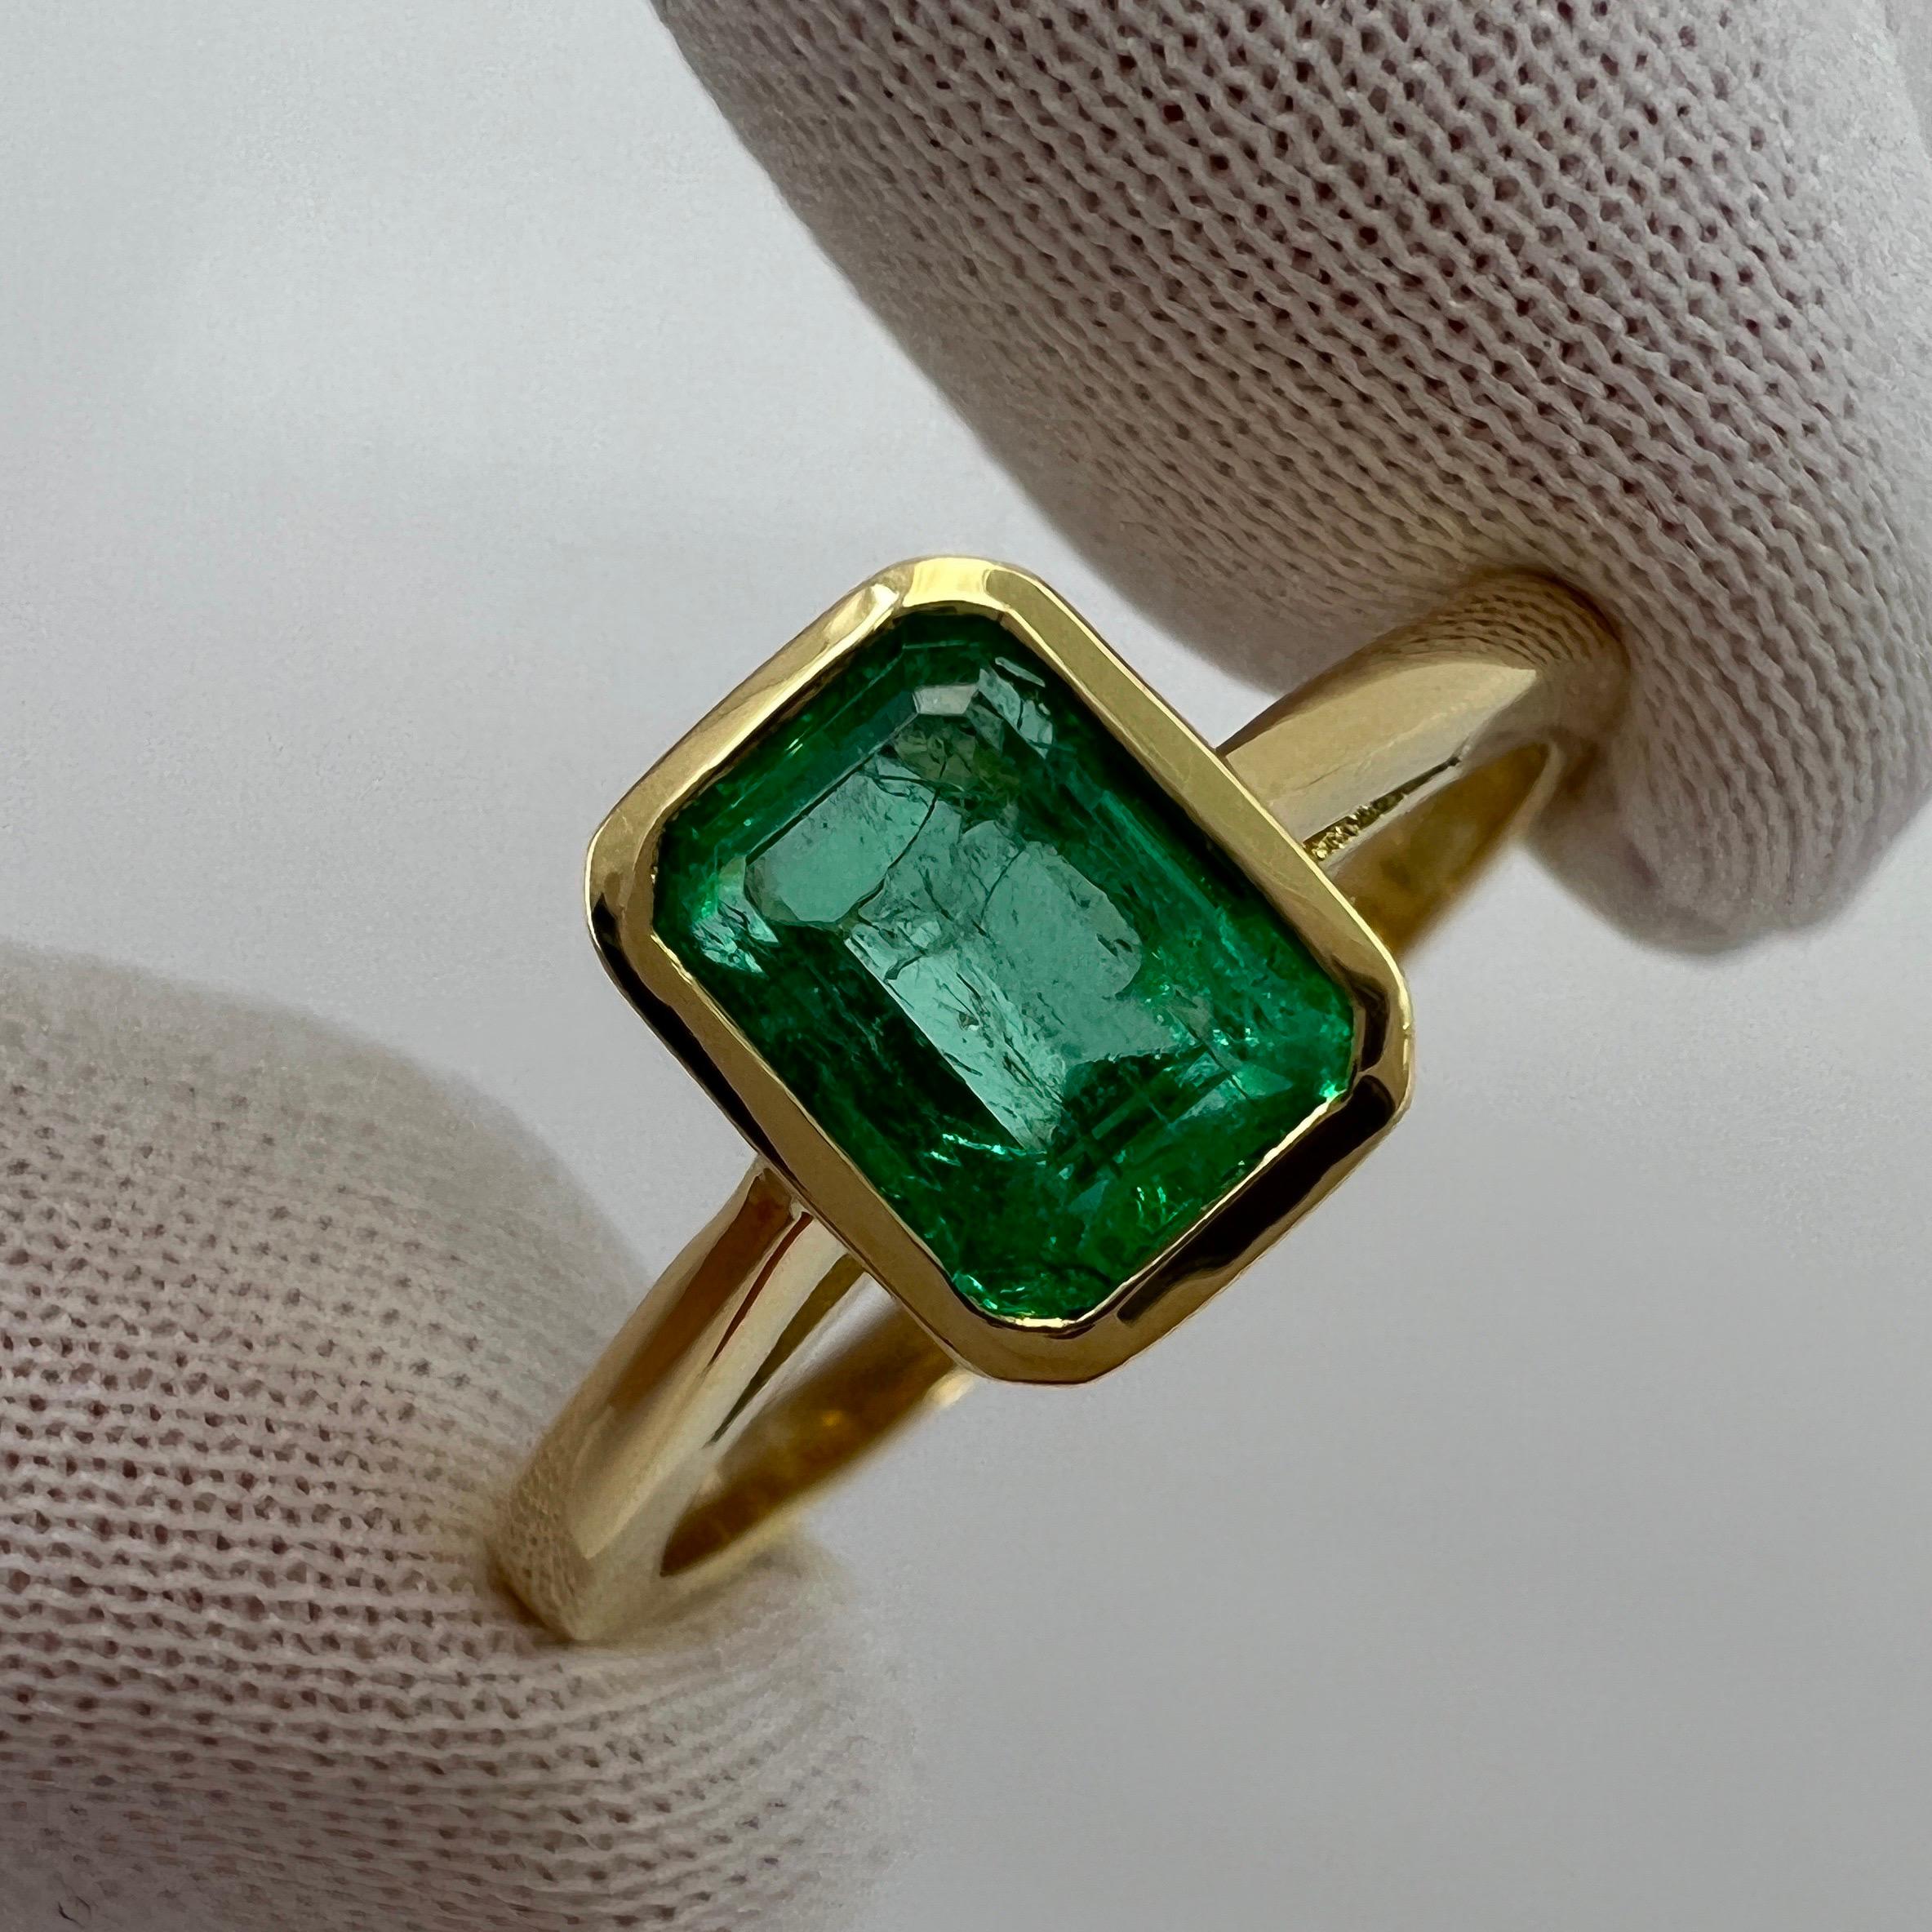 GIA Certified Vivid Green 1.5ct Colombian Emerald 18k Yellow Gold Solitaire Ring 2